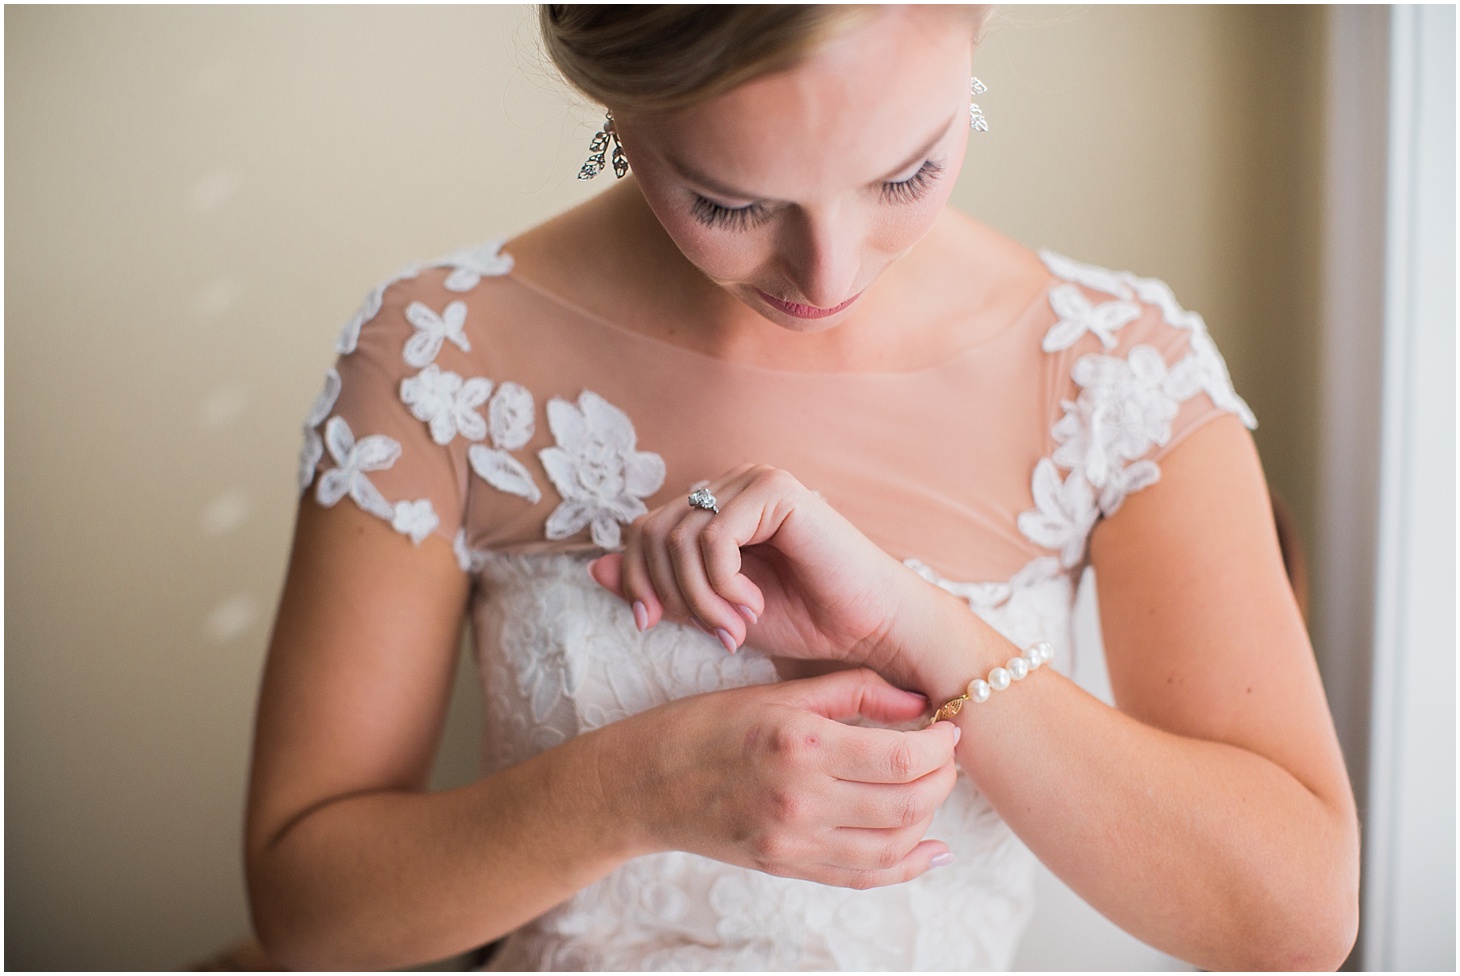 Bride Getting Ready in Romona Keveza Gown | Wedding Ceremony at Old Presbyterian Meeting House | Southern Black Tie wedding at St. Regis DC in Dusty Blue and Ivory | Sarah Bradshaw Photography